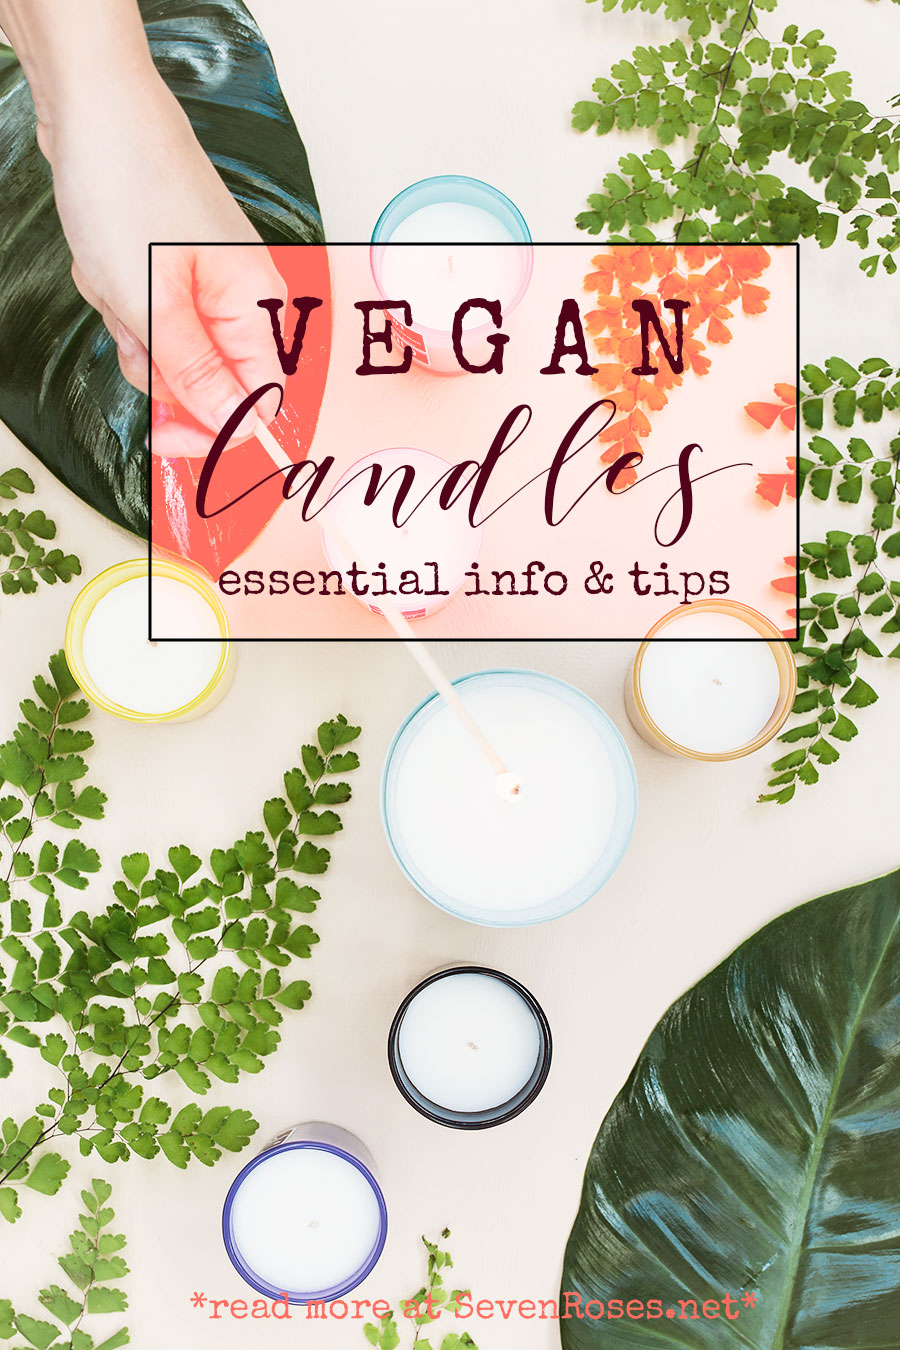 Vegan candles: essential info & safety tips